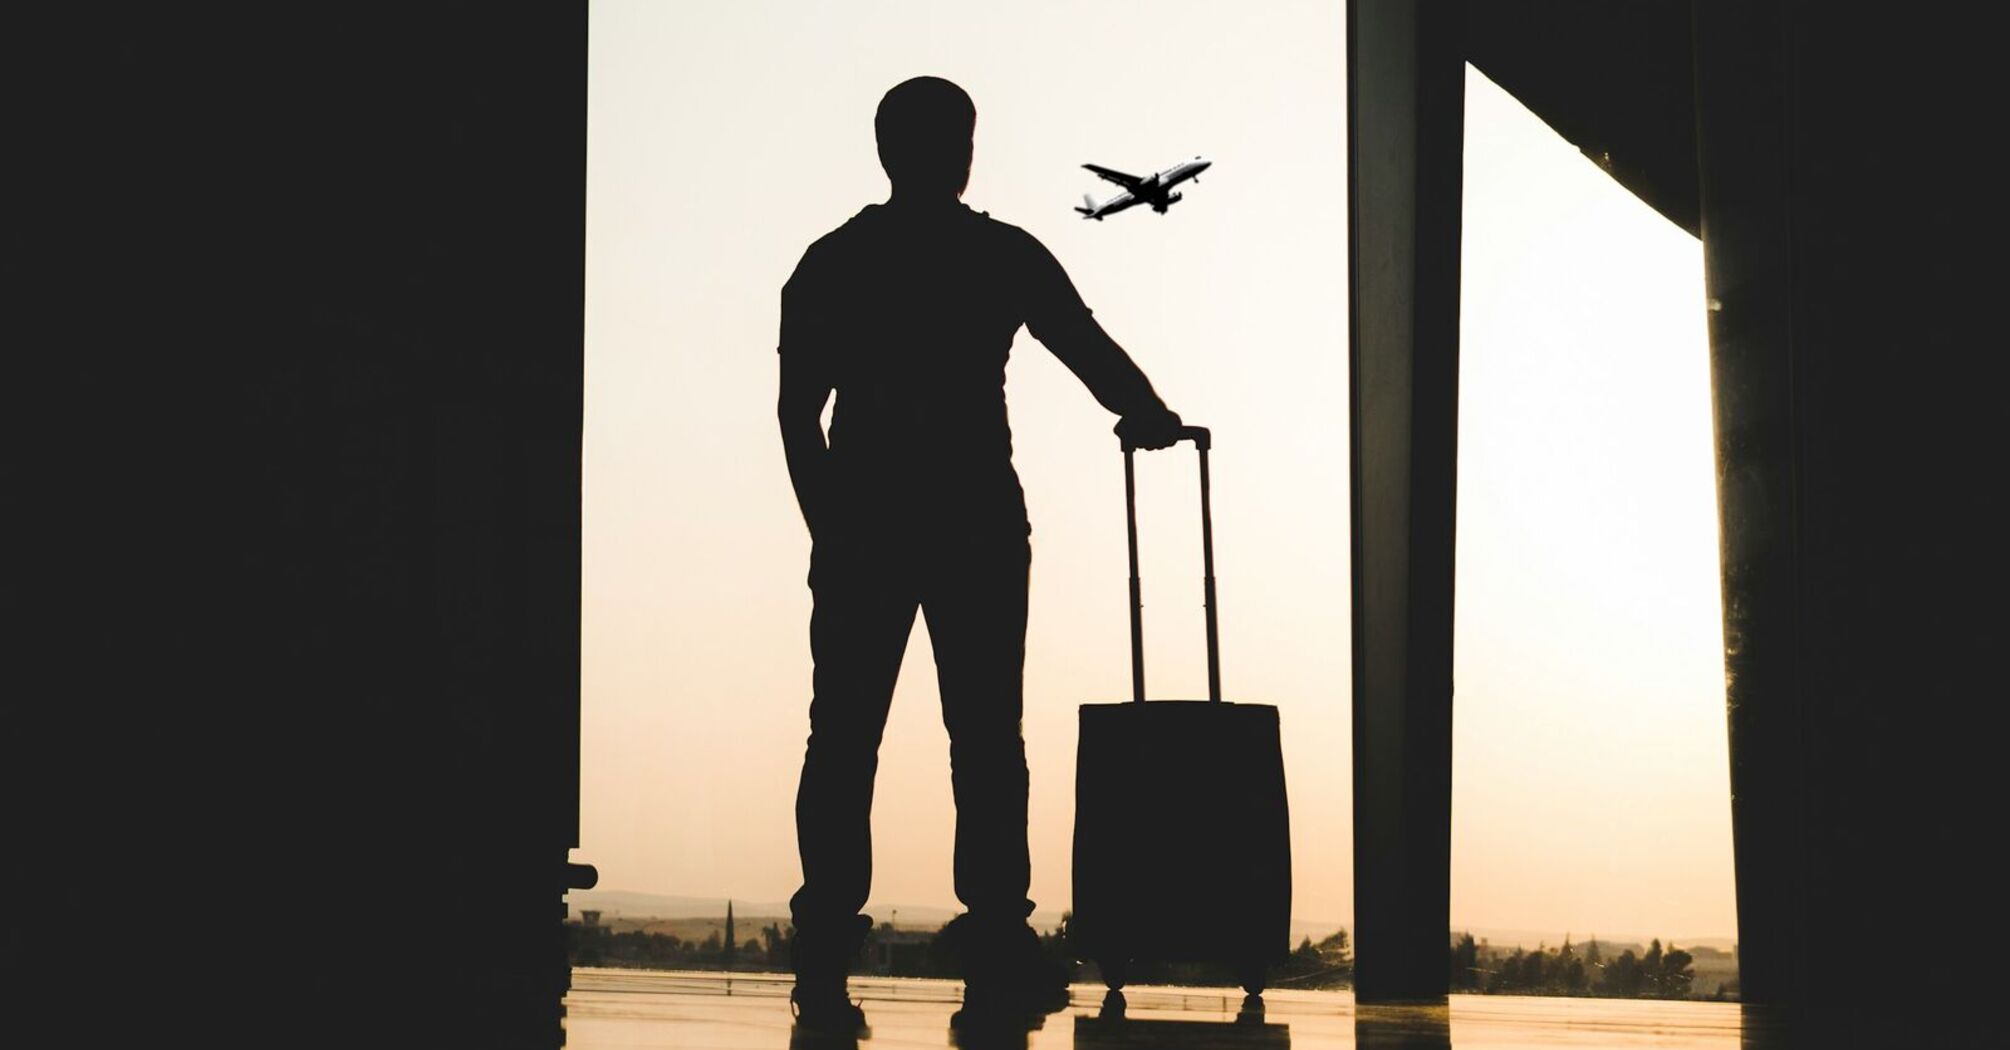 Silhouette of a man with a suitcase standing in an airport terminal, watching a plane take off during sunset